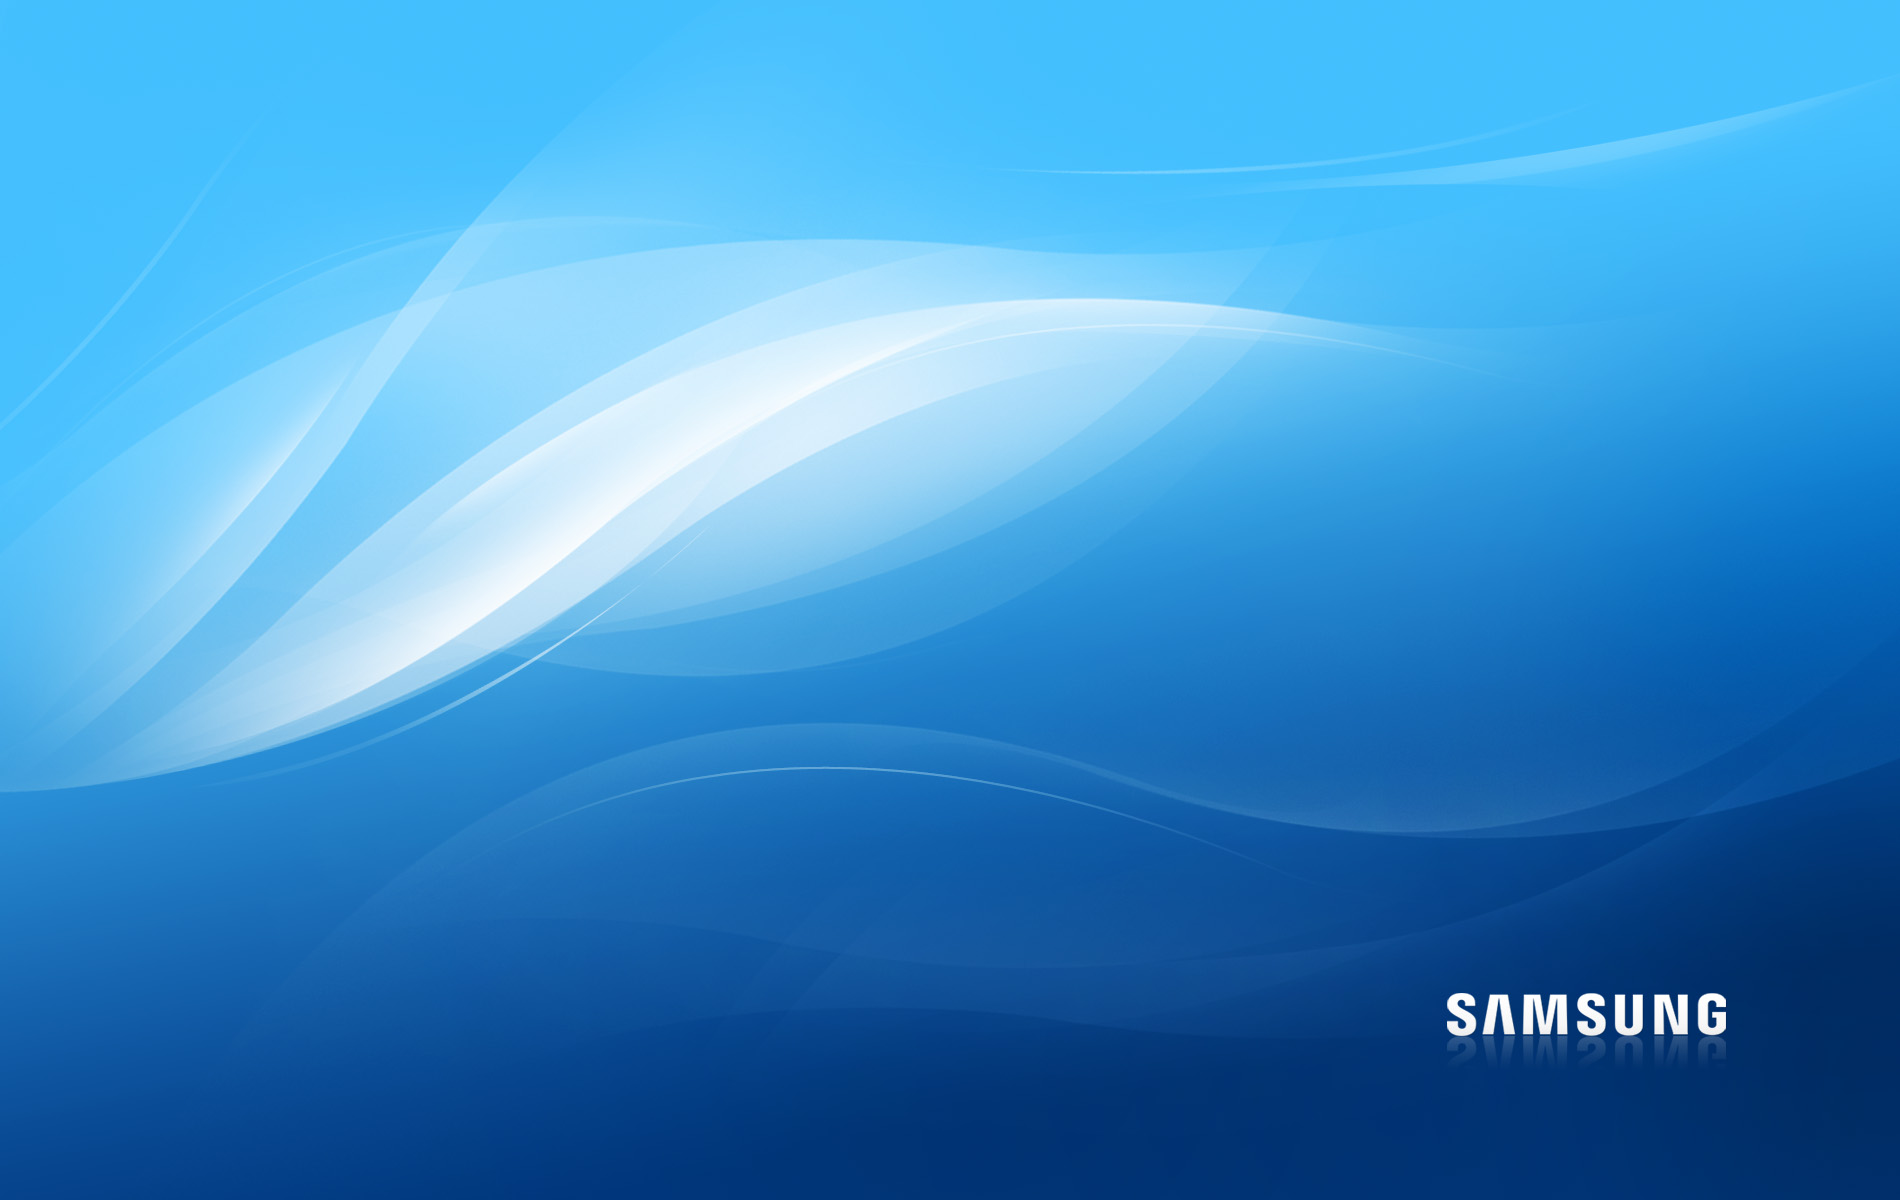 Samsung Wallpaper Full HD Pictures